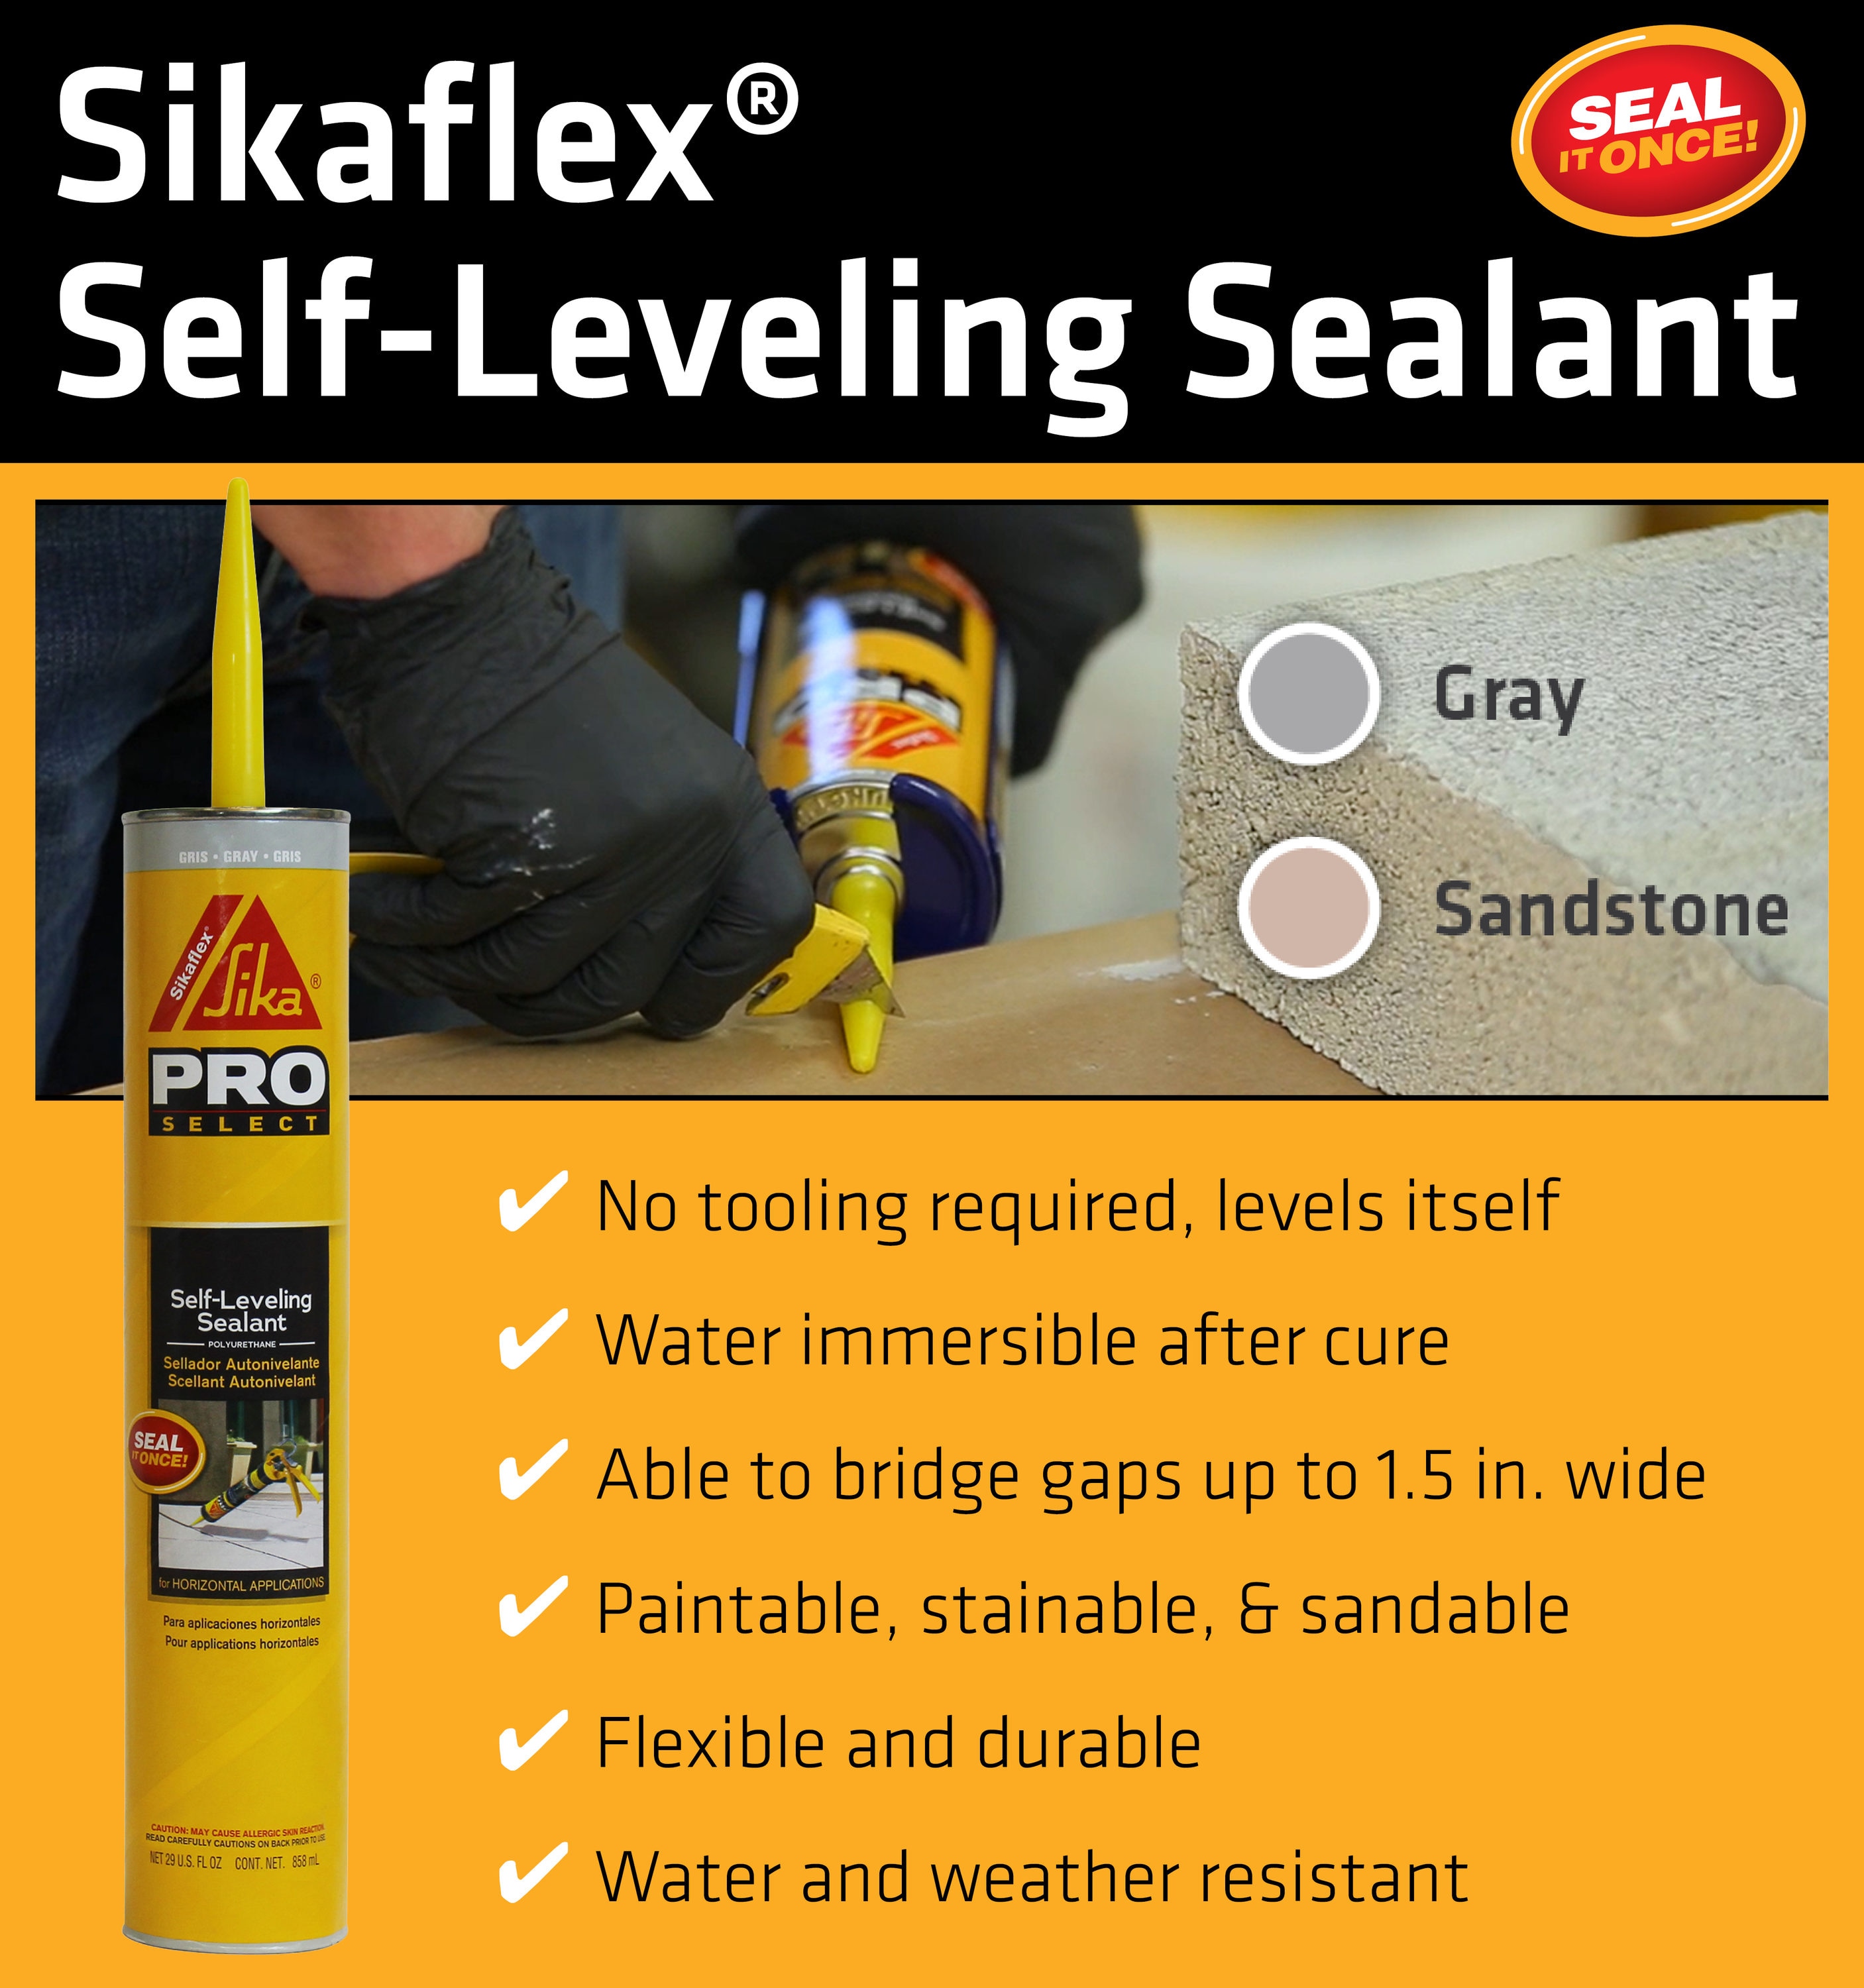 Sika® Joint Silicone